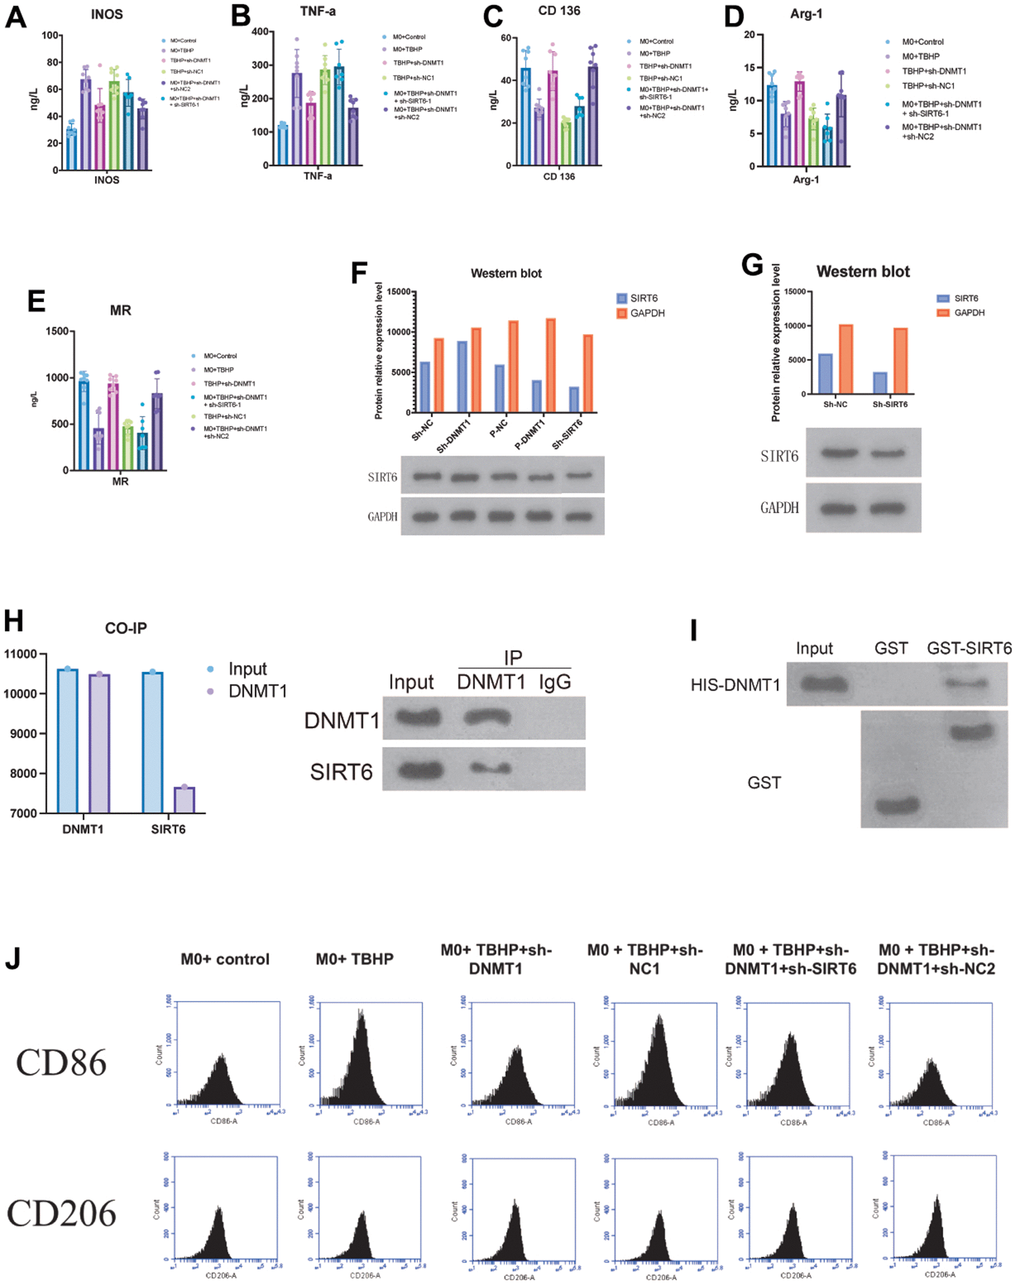 DNMT1 in NPCs suppresses M1 polarization of co-cultured macrophages by regulating SIRT6. (A–E) ELISA detection of the M1/M2 markers expression. (F, G) negative regulatory role of DNMT1 on SIRT6 expression. (H) GST pull-down and CO-IP experiments were used to detect the binding of DNMT1-SIRT6 and the CO-IP experiment of dnmt1-sirt6 interaction. (I) GST-pull down assay and immunoprecipitation assay were used to detect the interaction between SIRT6 and DNMT1. (J) the CD206 and CD86 for the macrophage phenotypes of all groups were detected by flow cytometry.